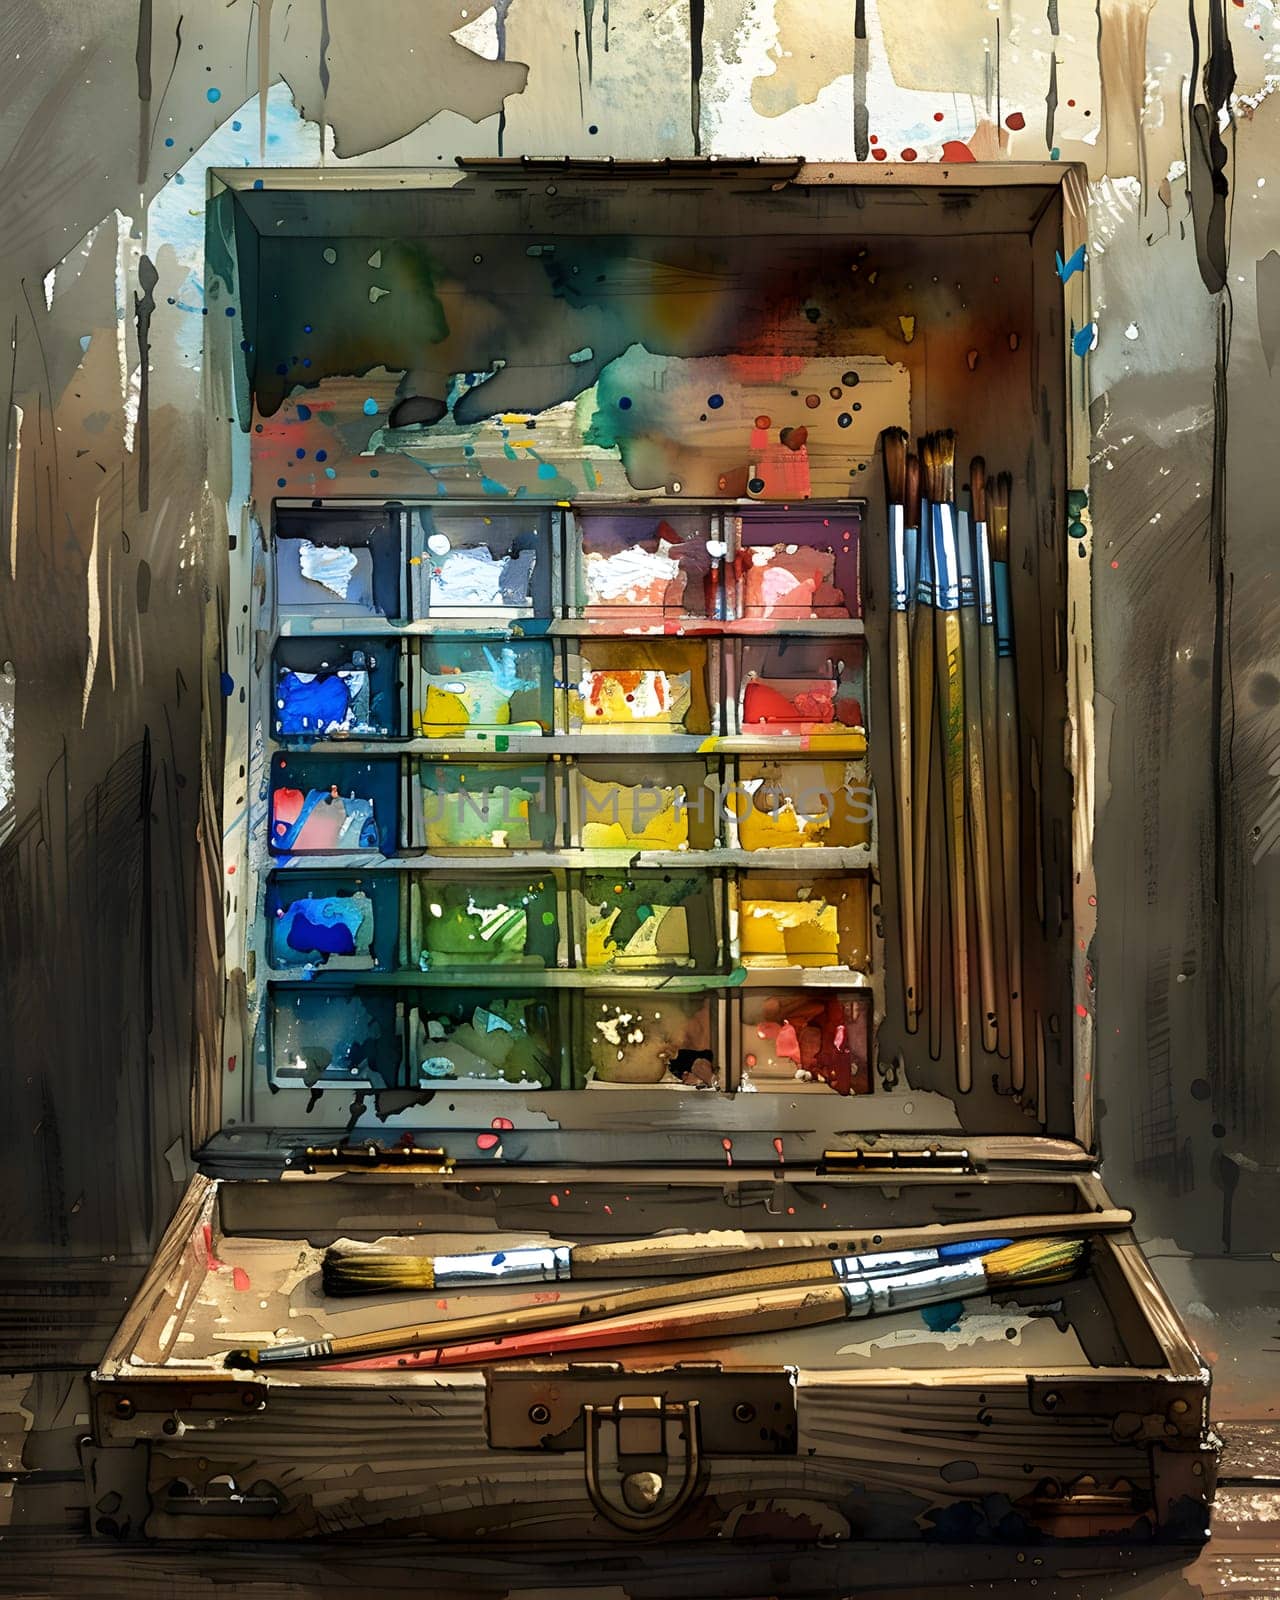 An artwork depicting a metal suitcase filled with colorful paints and brushes, set against a backdrop of glass shelving in a retail building